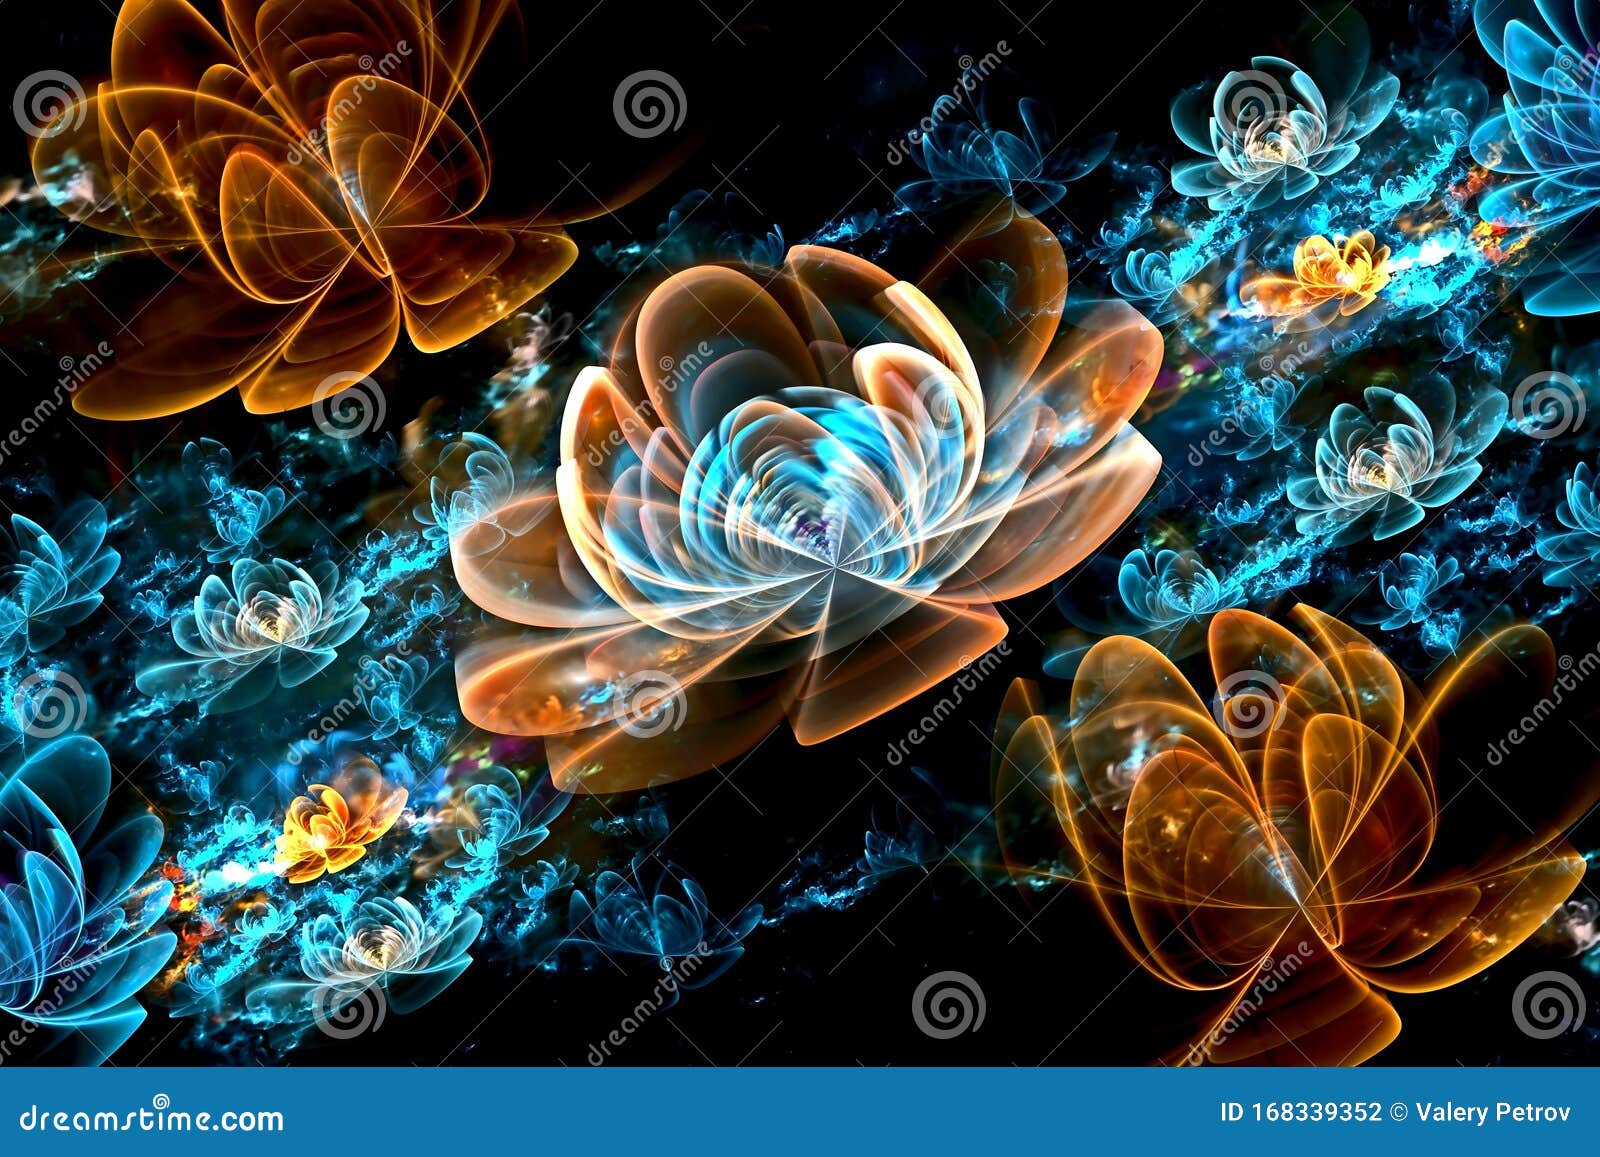 Glowing Flower abstract